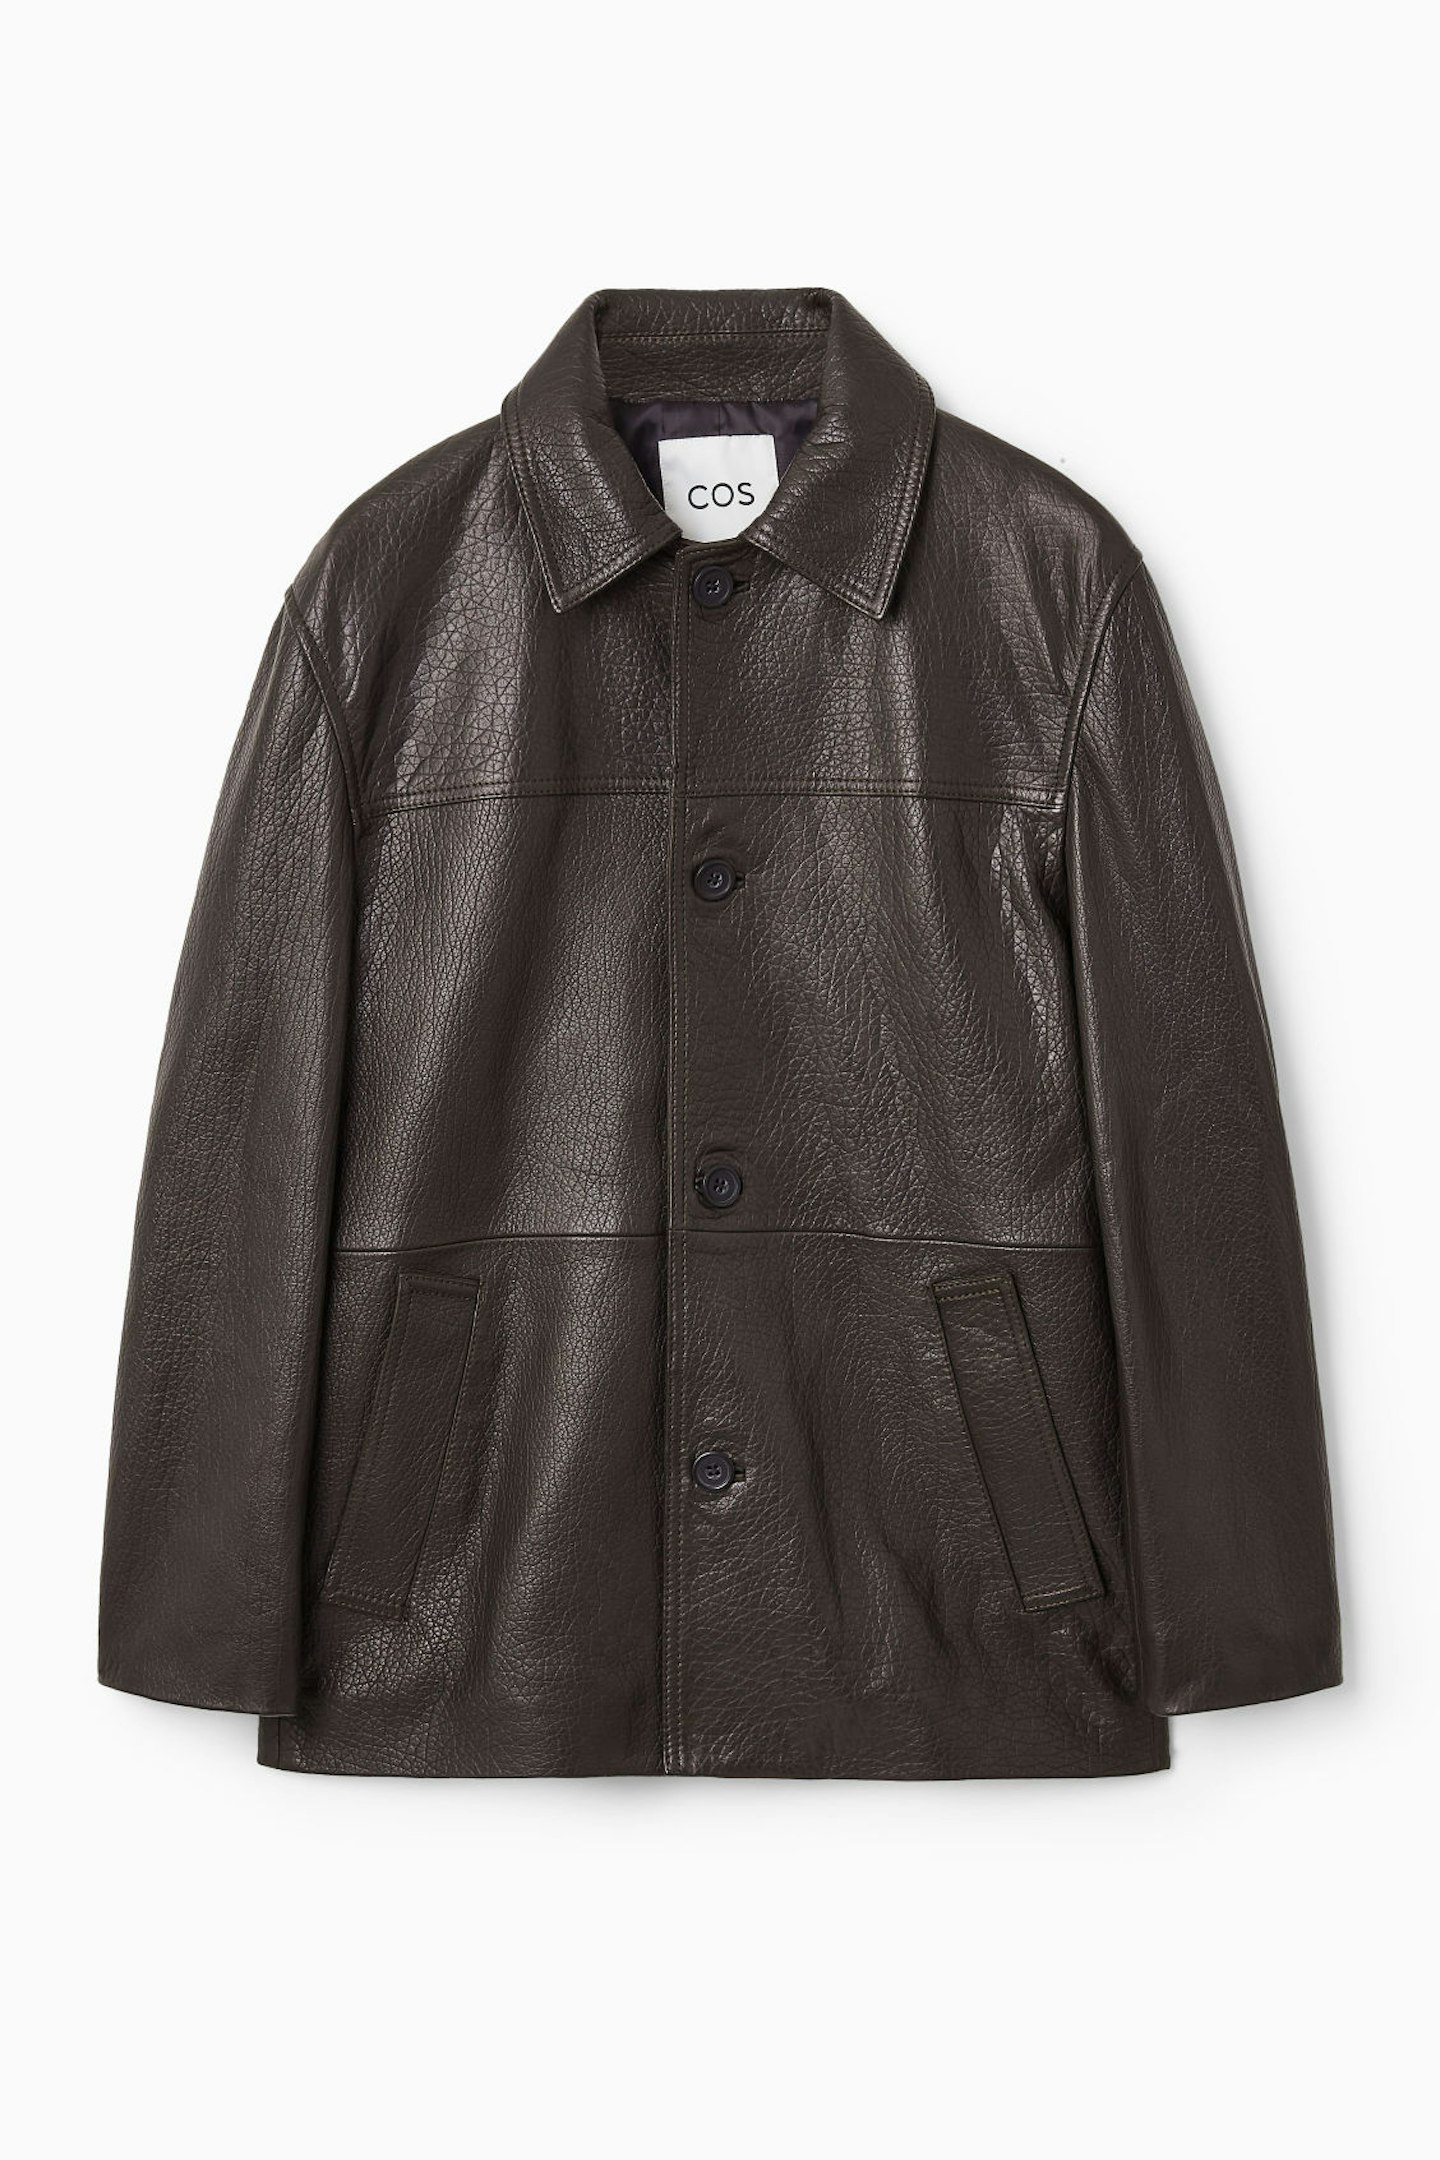 COS, Collared Grained-Leather Jacket